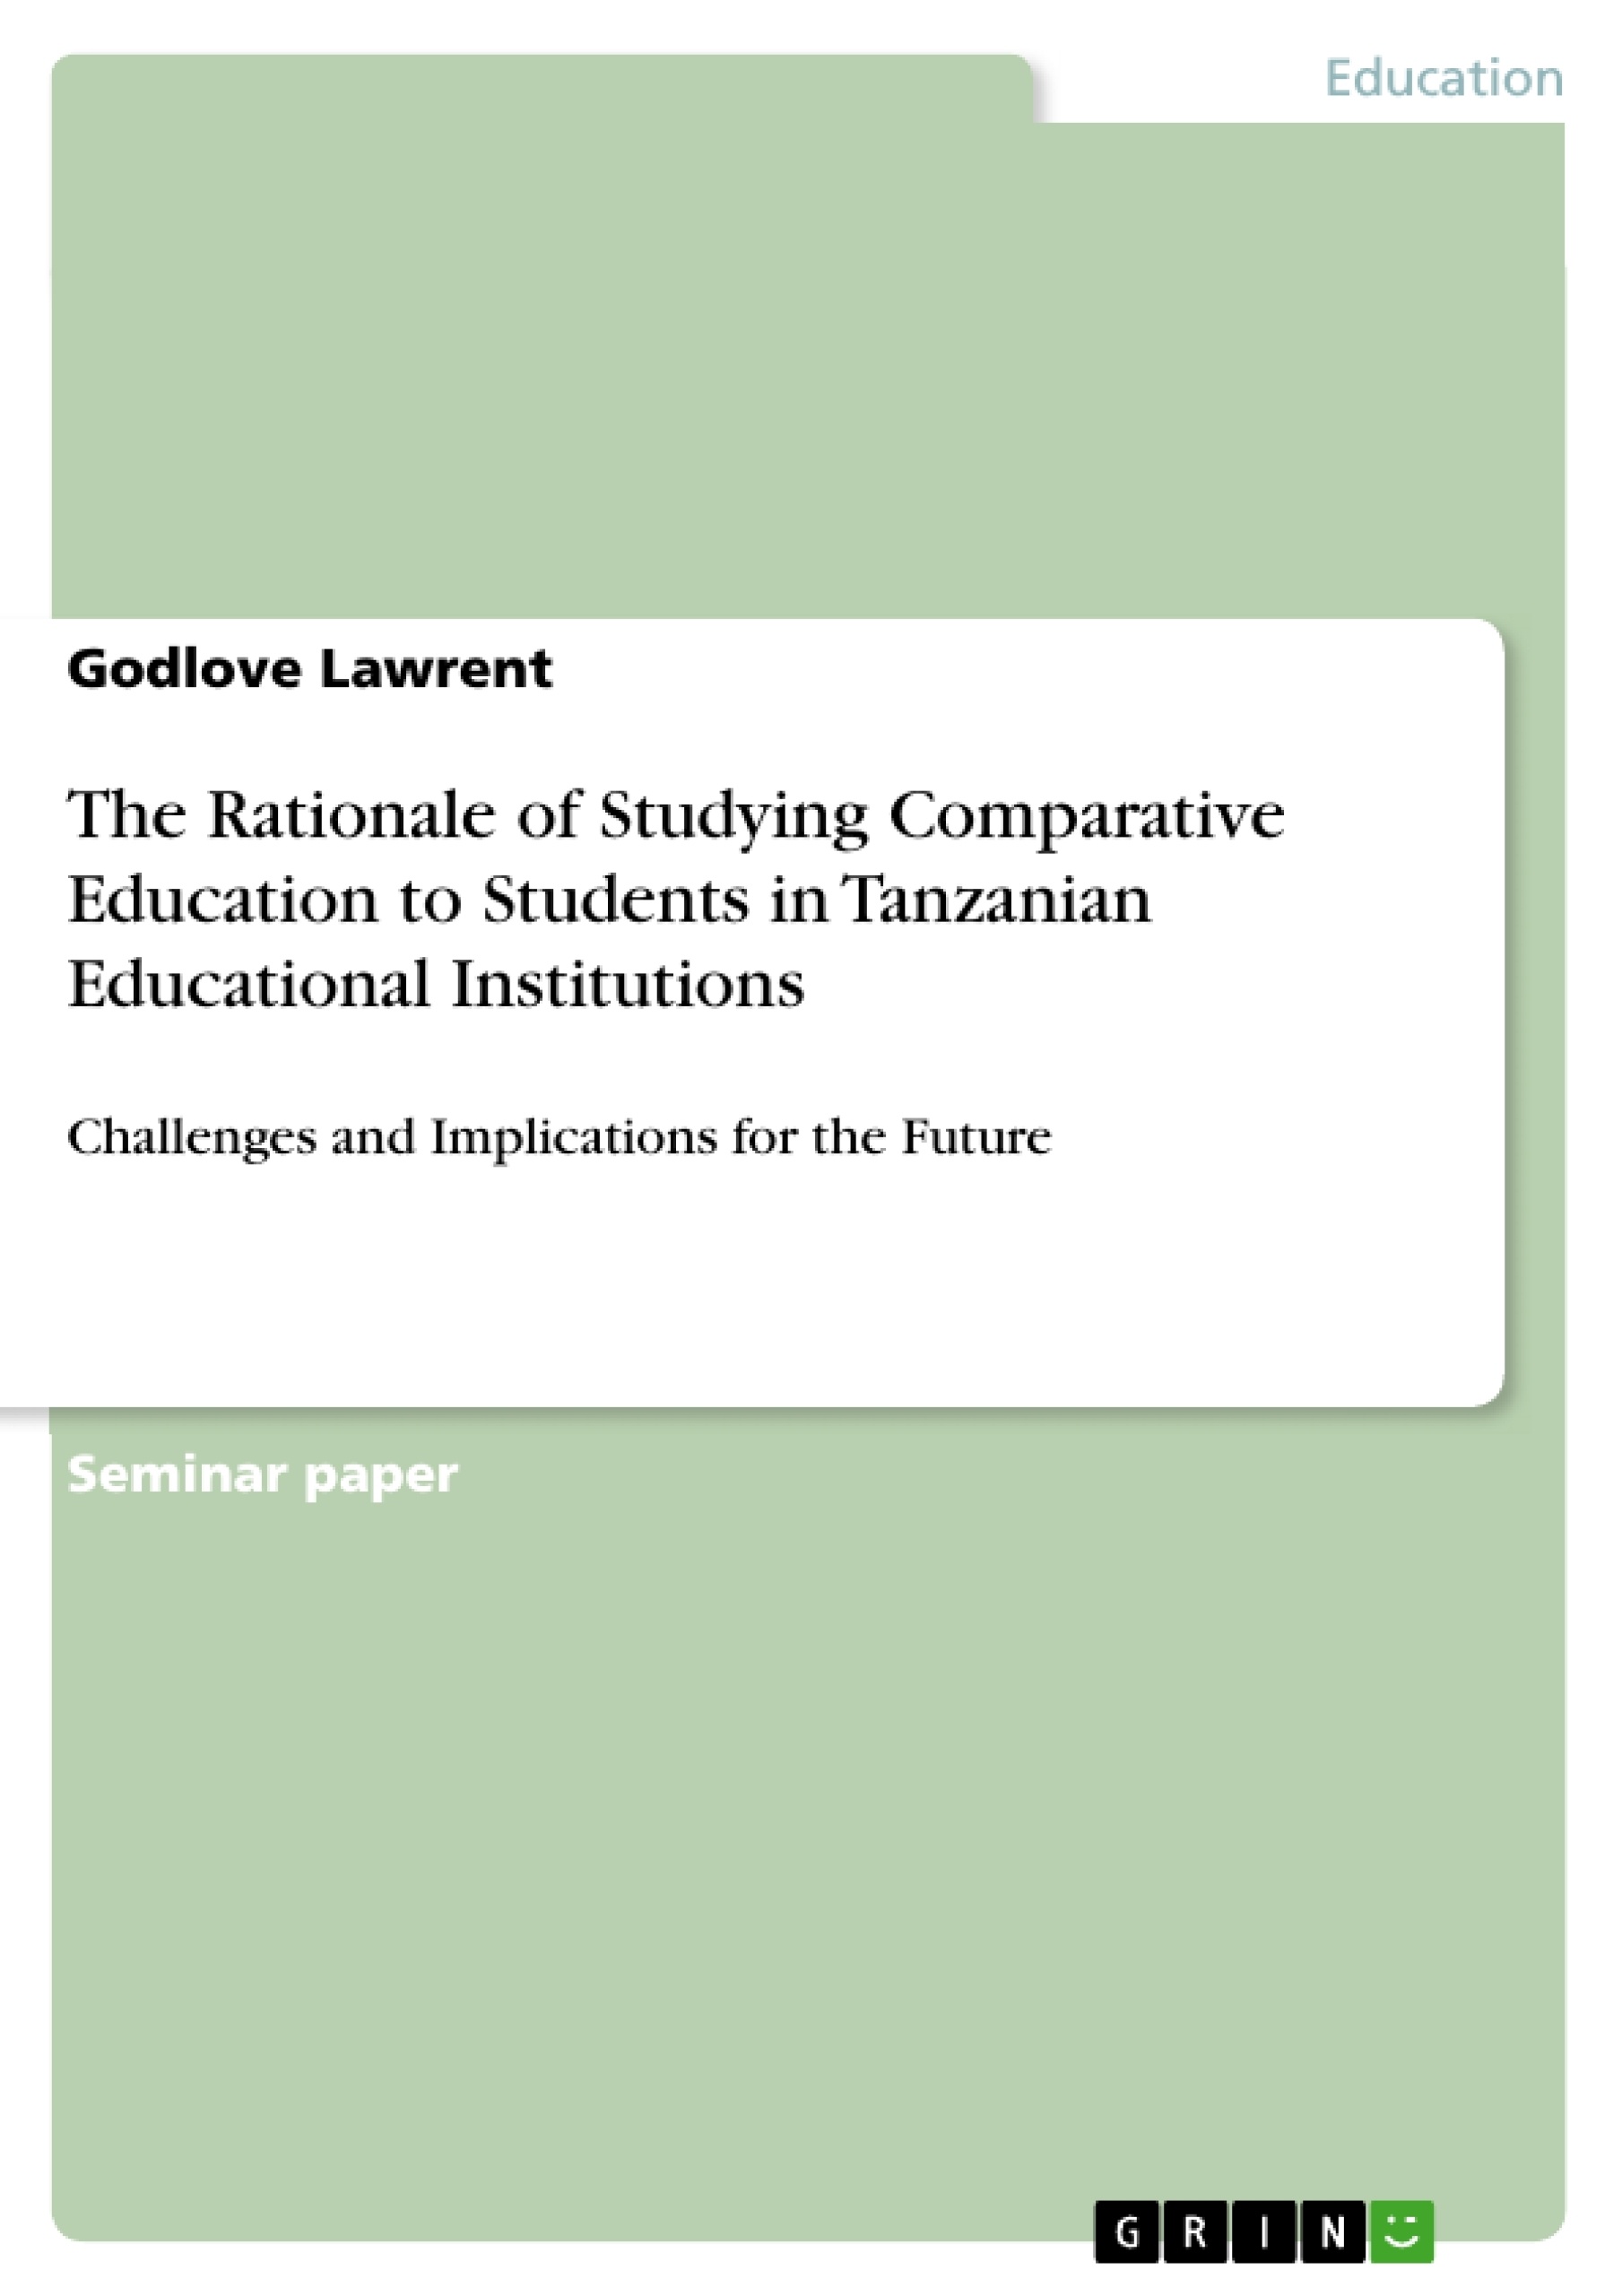 Title: The Rationale of Studying Comparative Education to Students in Tanzanian Educational Institutions